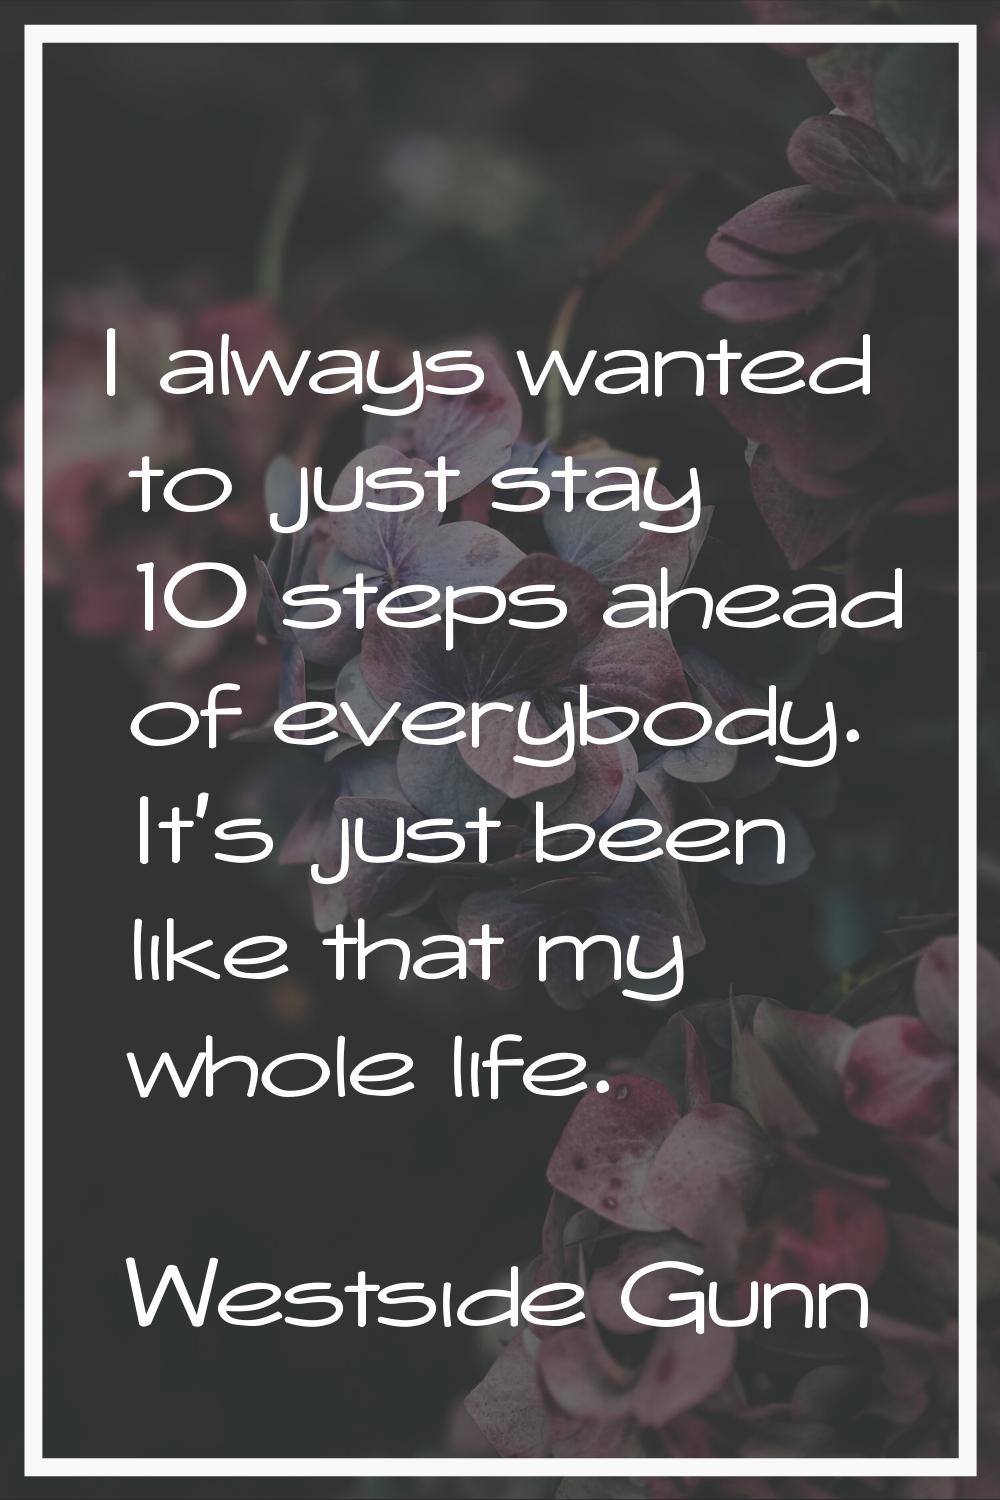 I always wanted to just stay 10 steps ahead of everybody. It's just been like that my whole life.